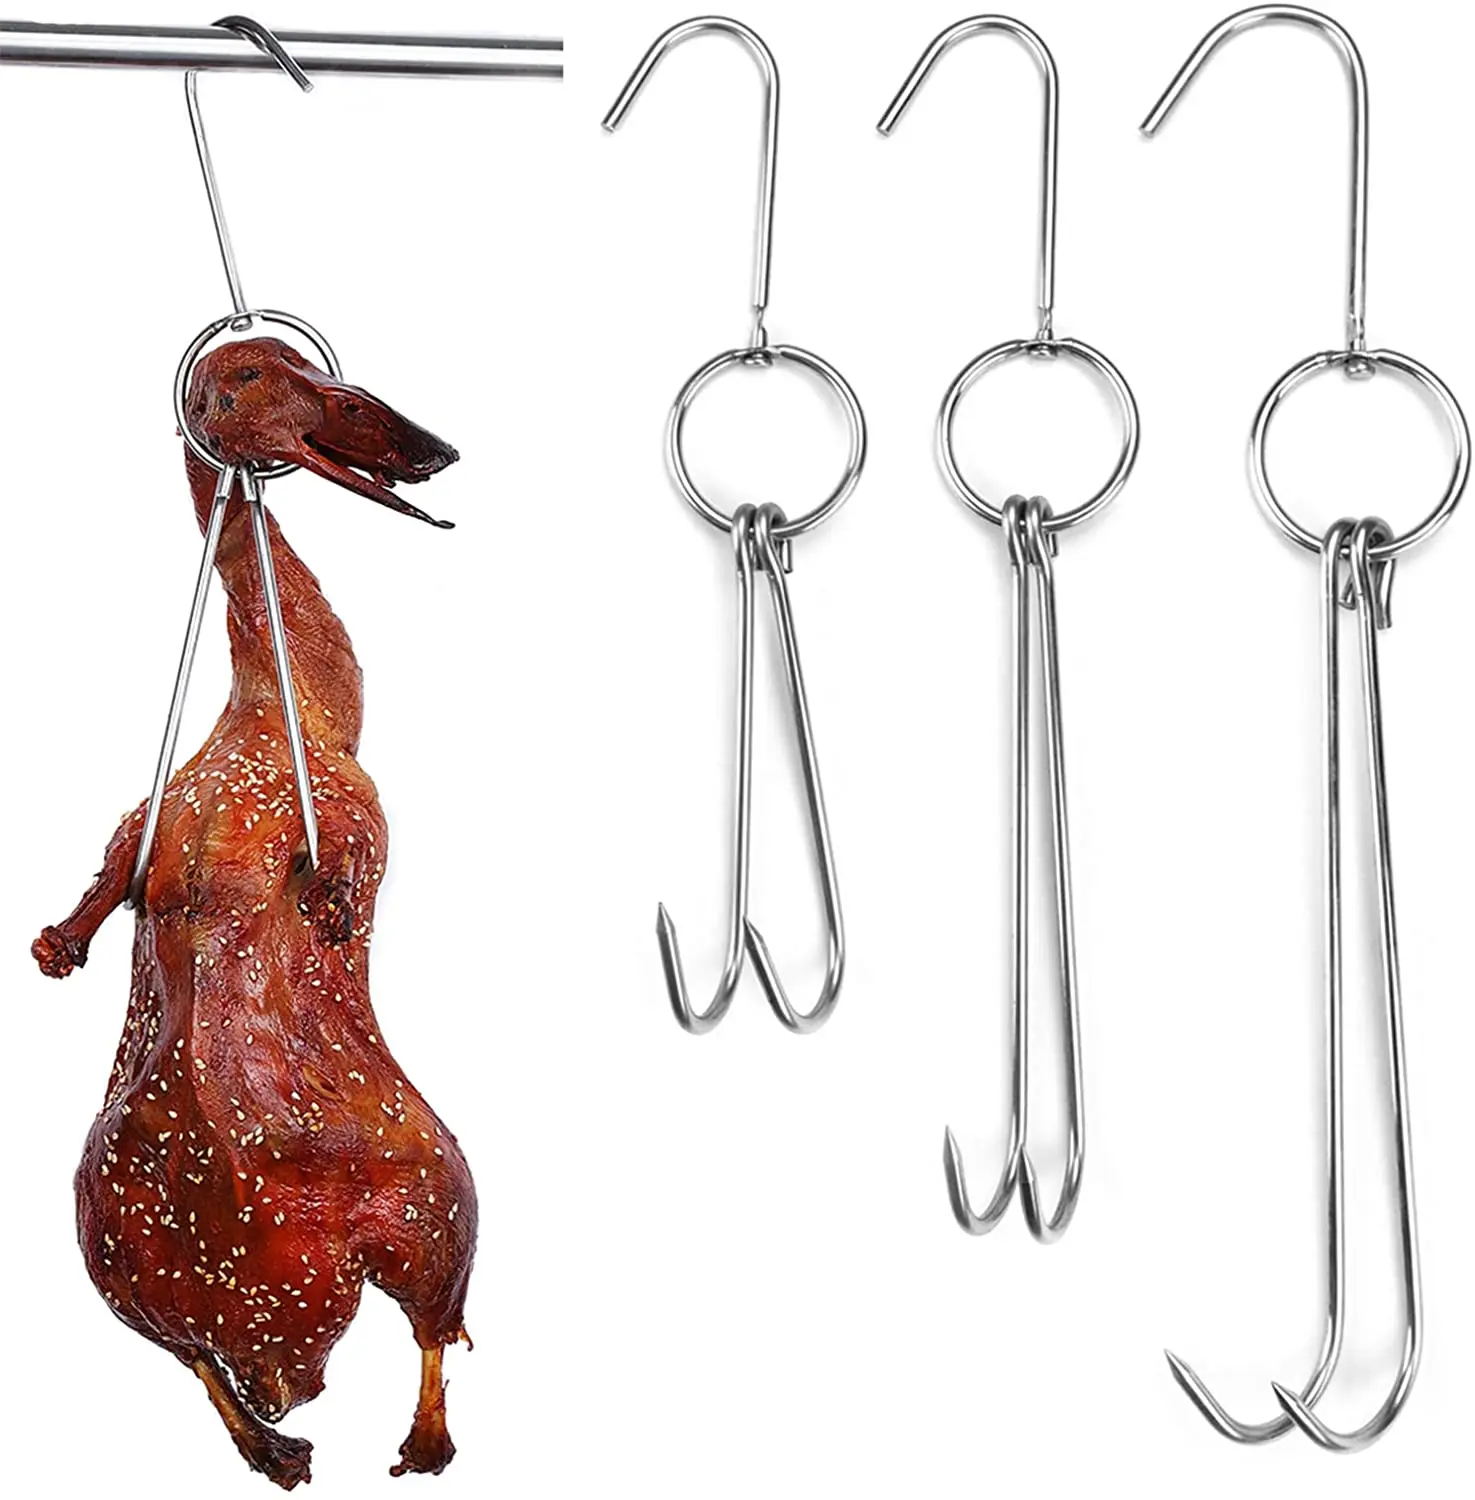 Stainless Steel Meat Hooks With Sharp Tip Double Hook Poultry